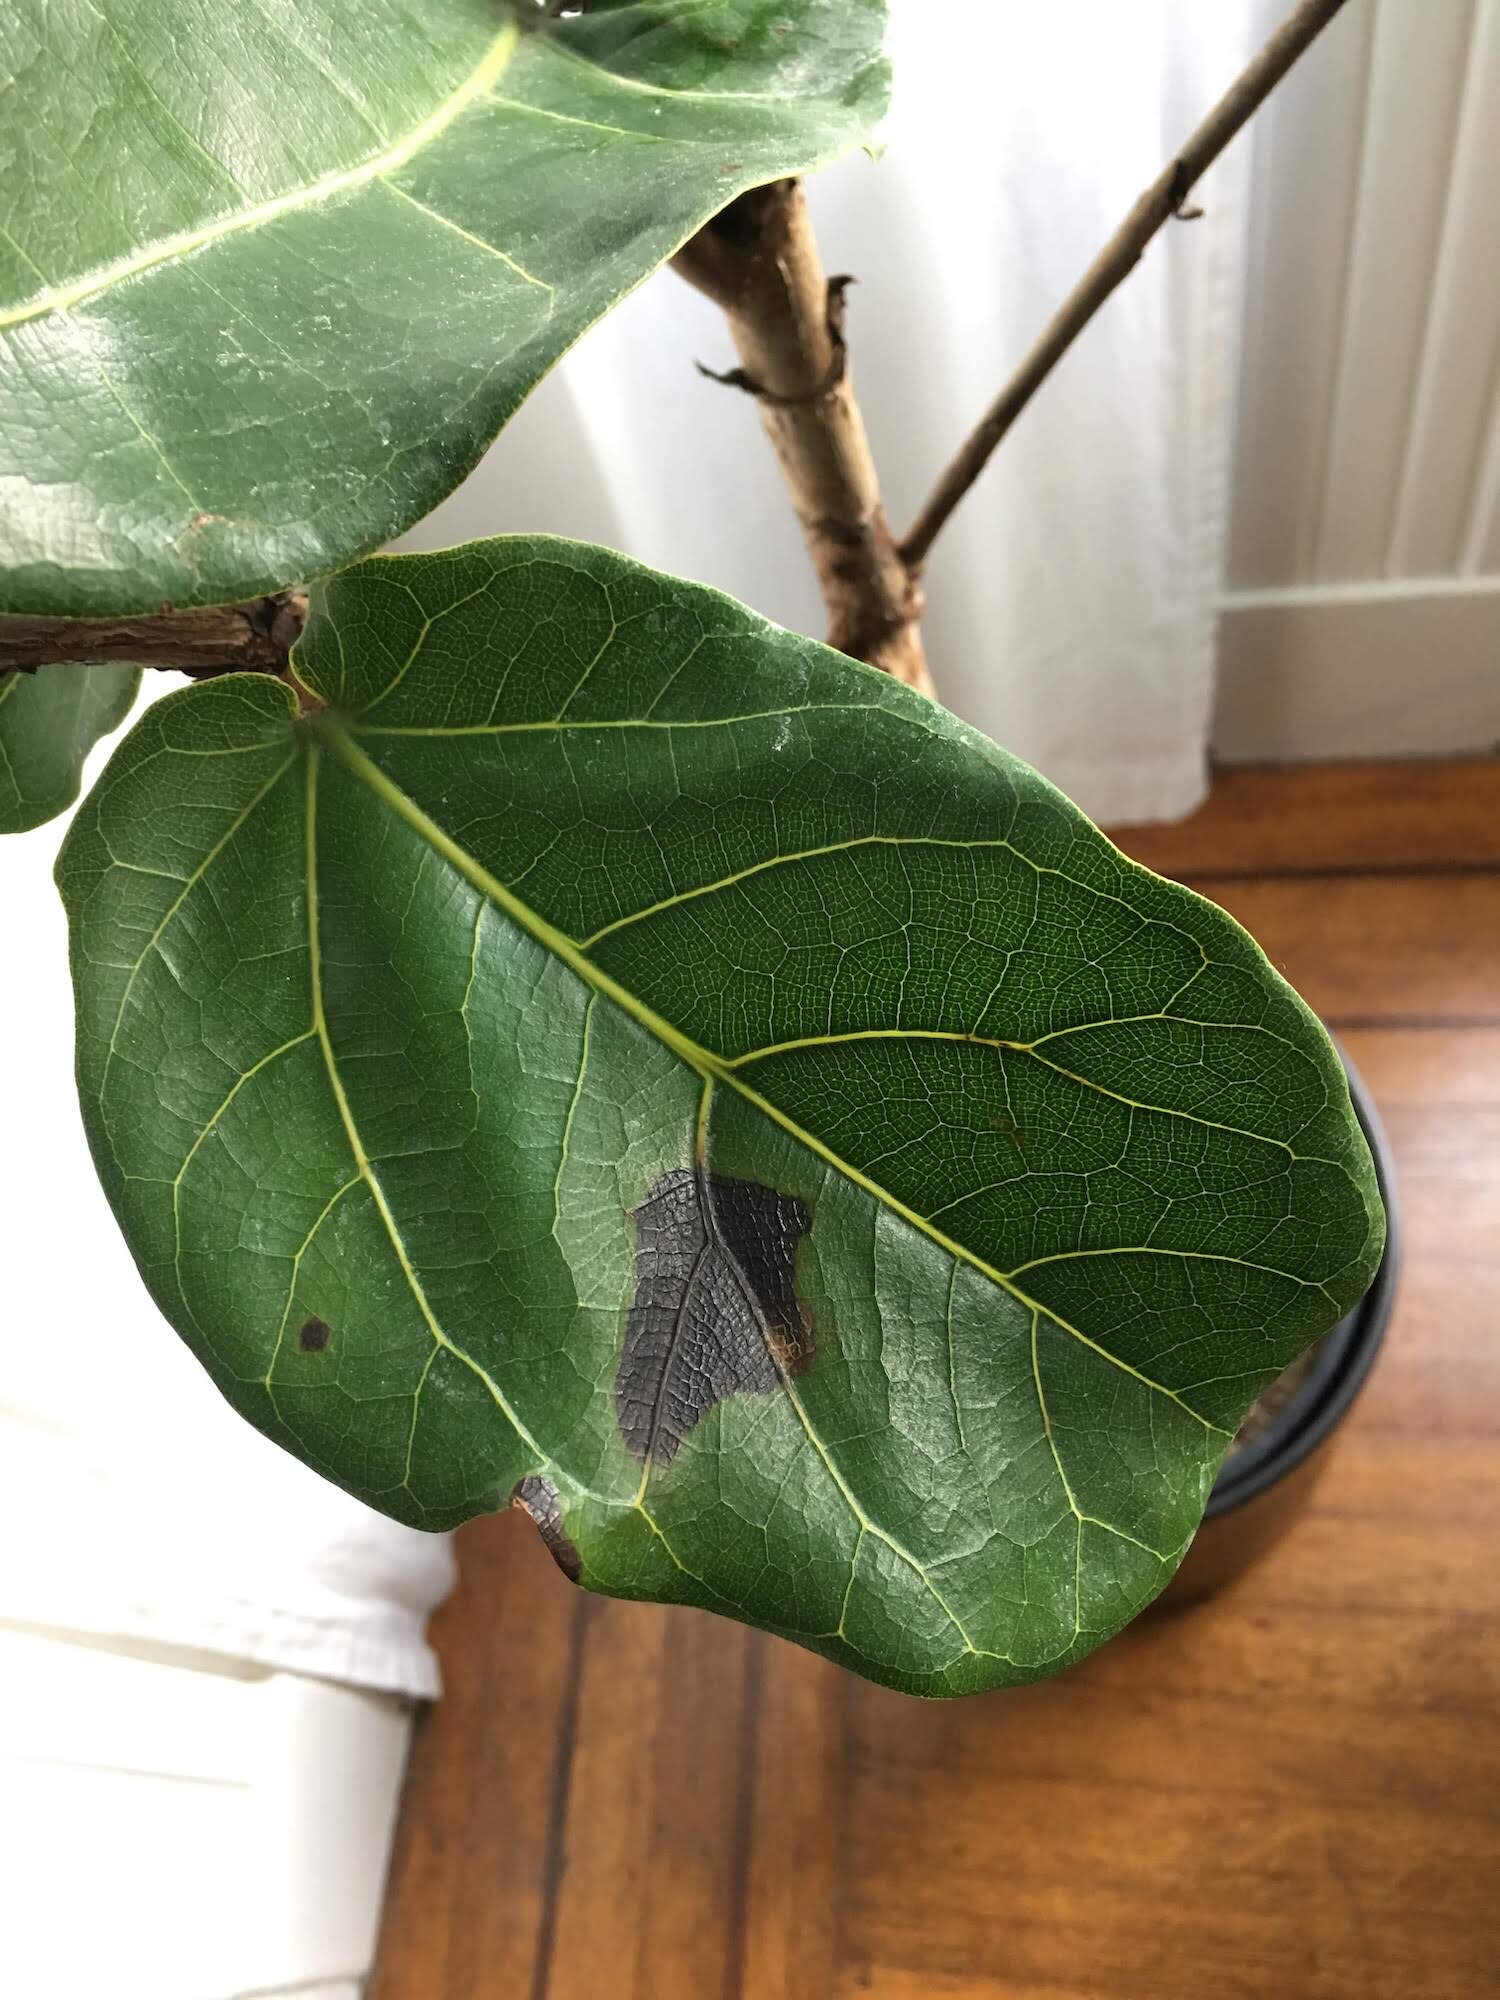 When to be Concerned about Brown Leaves on Your Tree